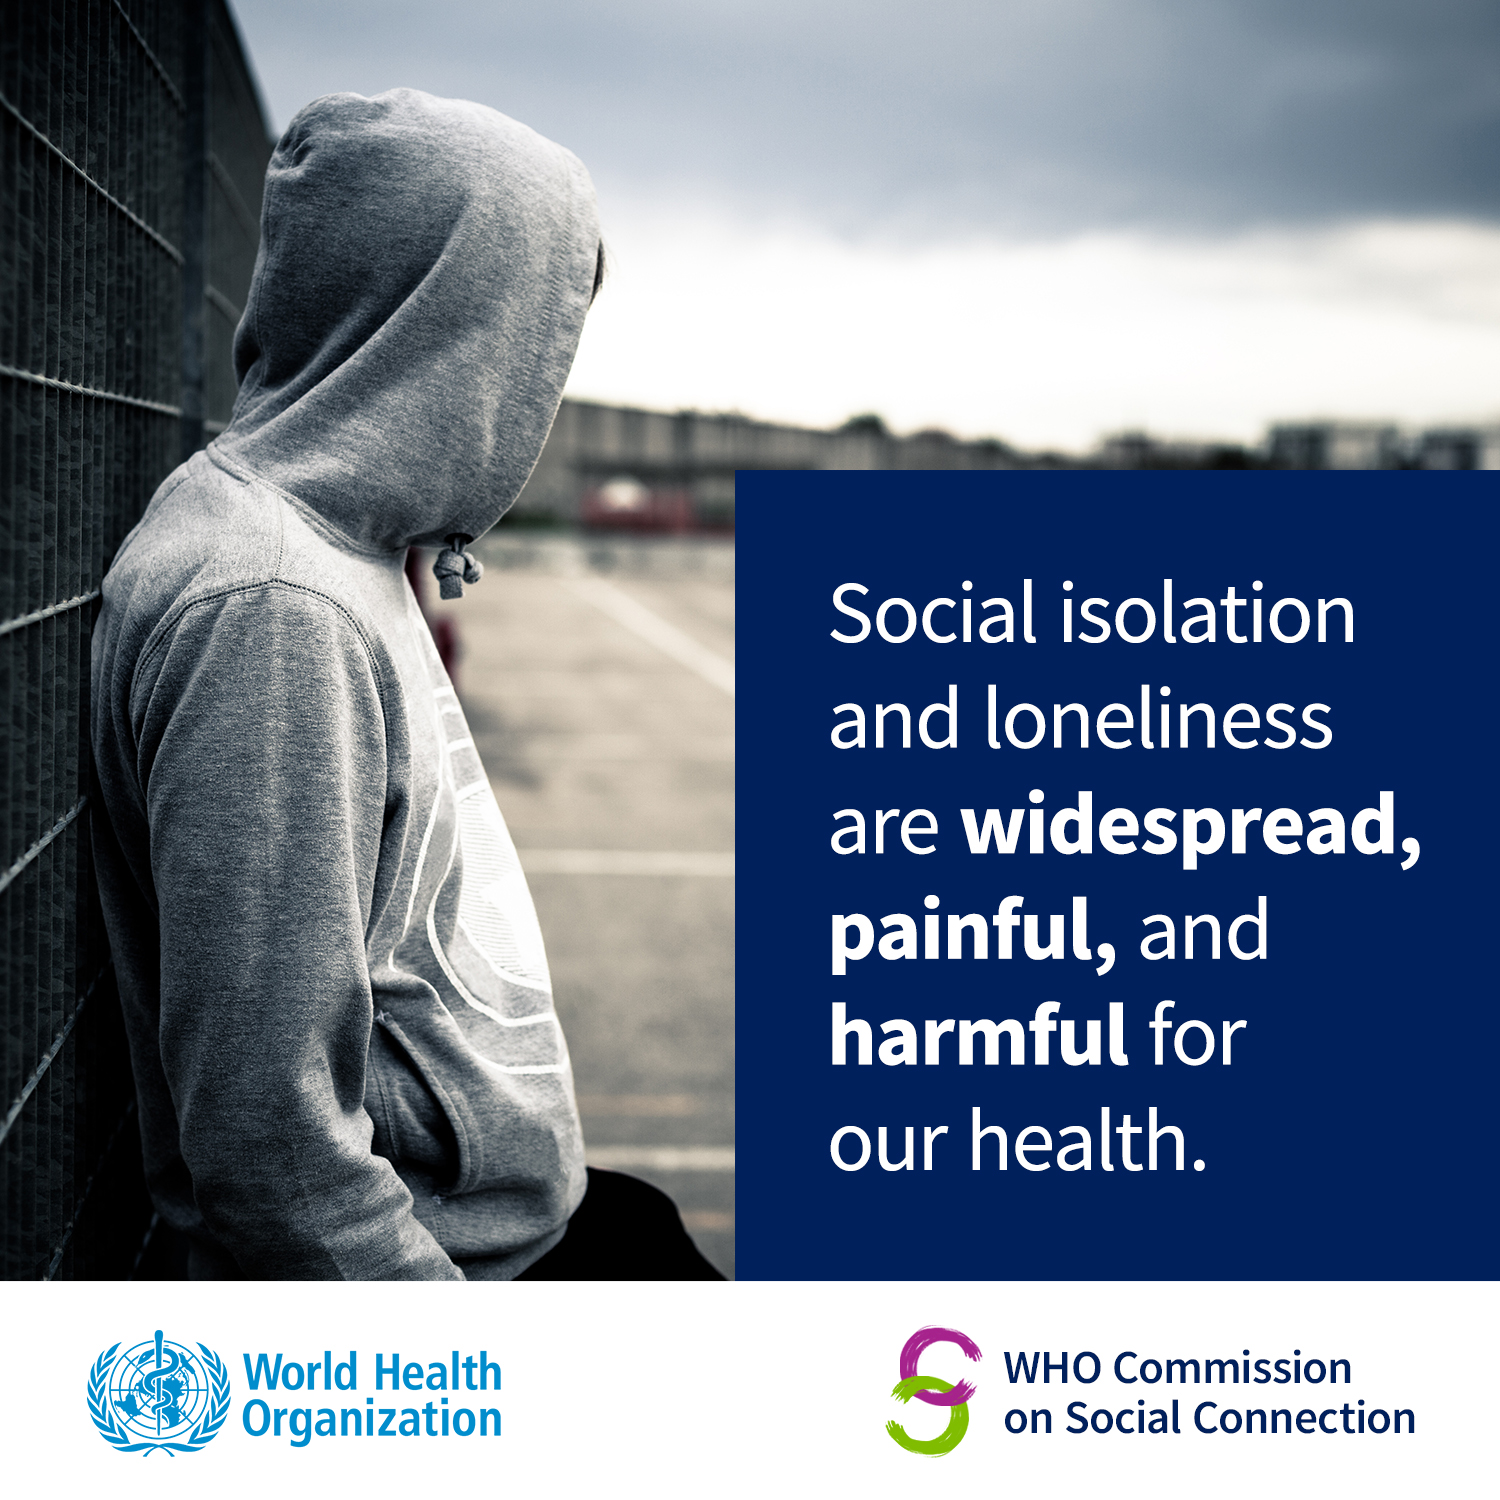 Health Risks of Social Isolation and Loneliness